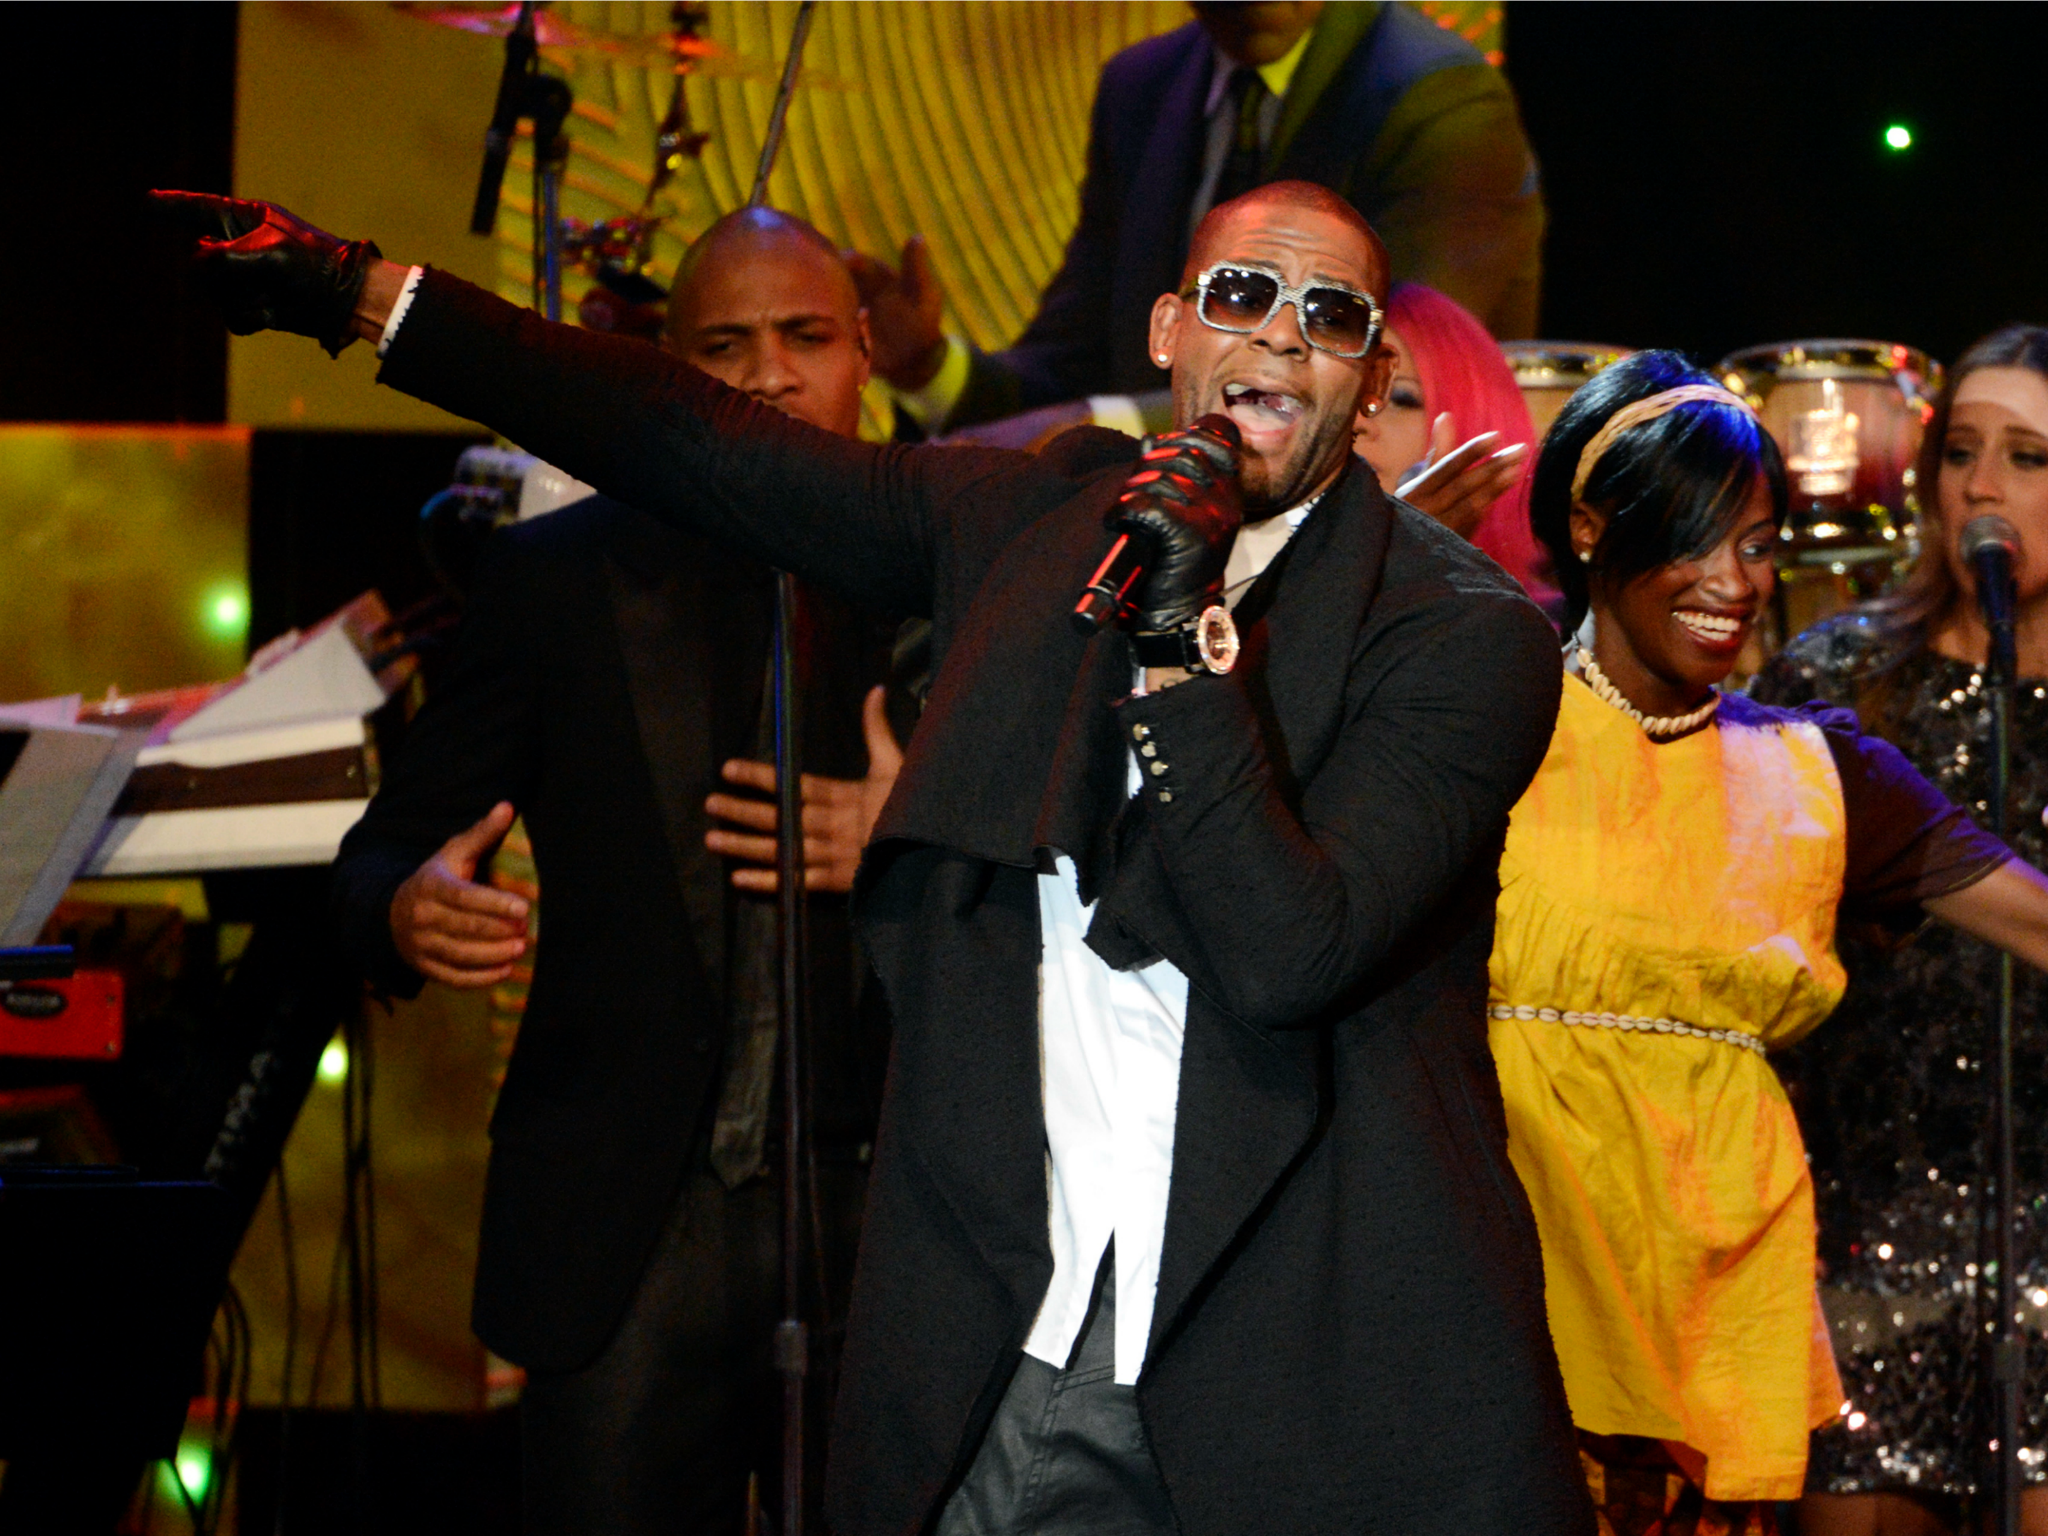 A George official has called for an investigation of allegations against singer R. Kelly, seen here performing at the Clive Davis Pre-Grammy Gala on January 25, 2014